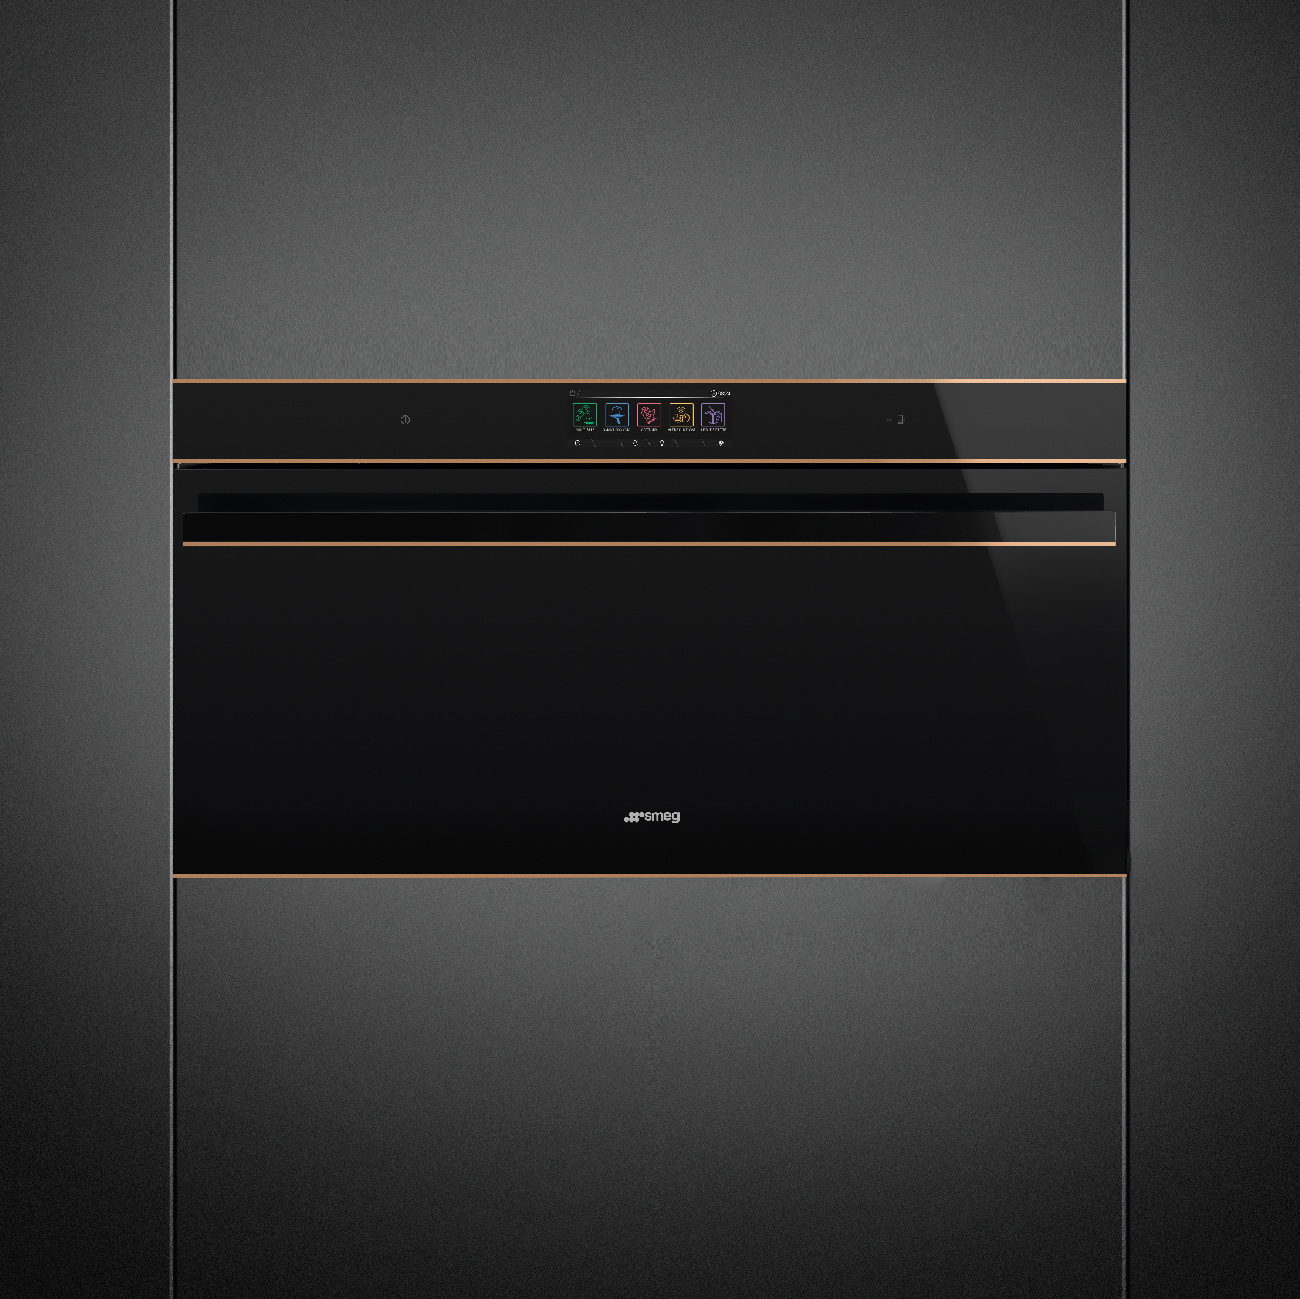 Wi-Fi Thermo-ventilated Oven Reduced height 90cm Smeg_8